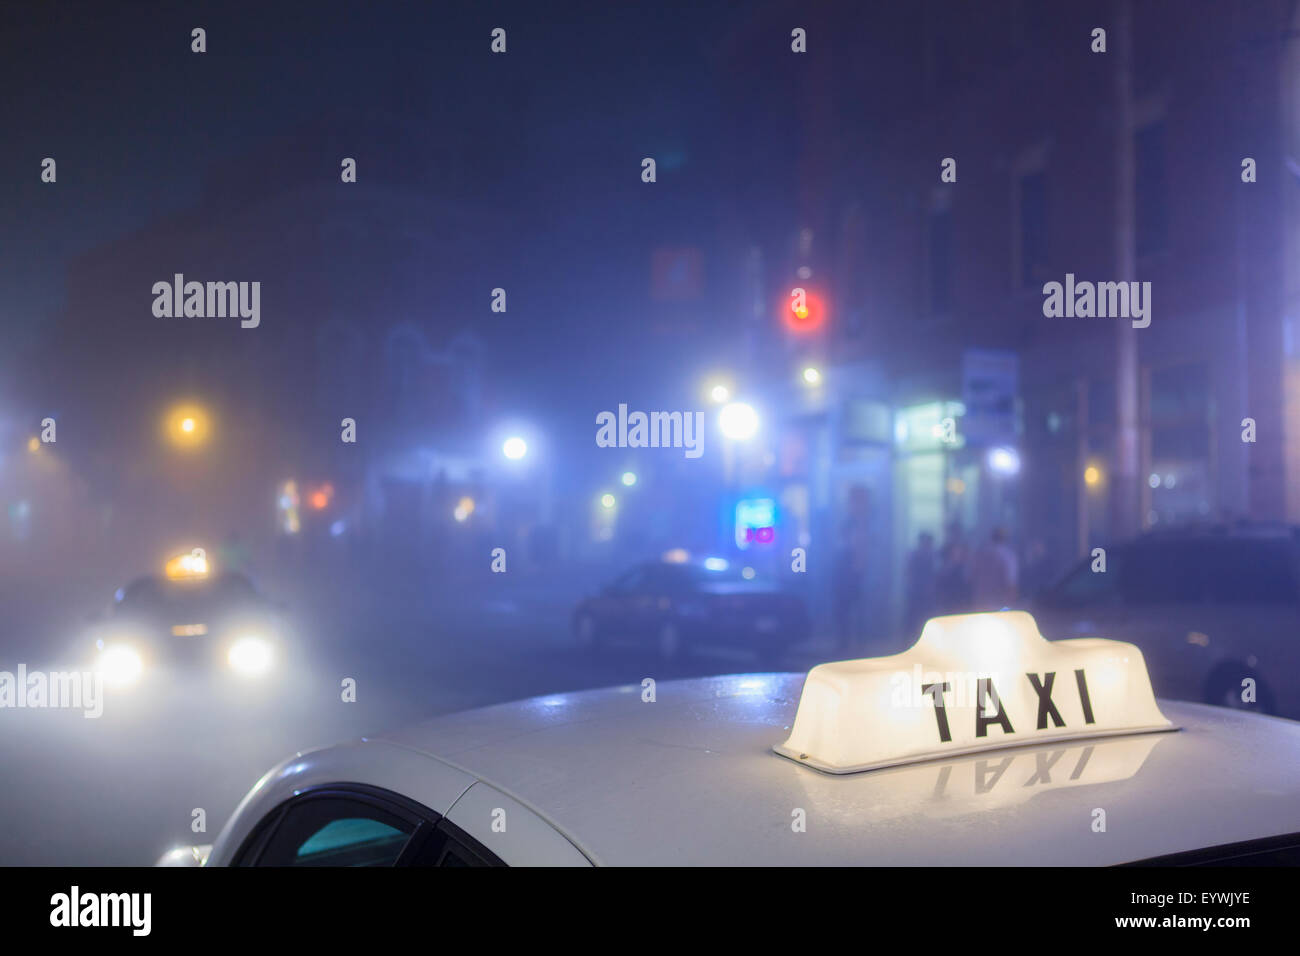 Taxi cab in the city in Boston Stock Photo